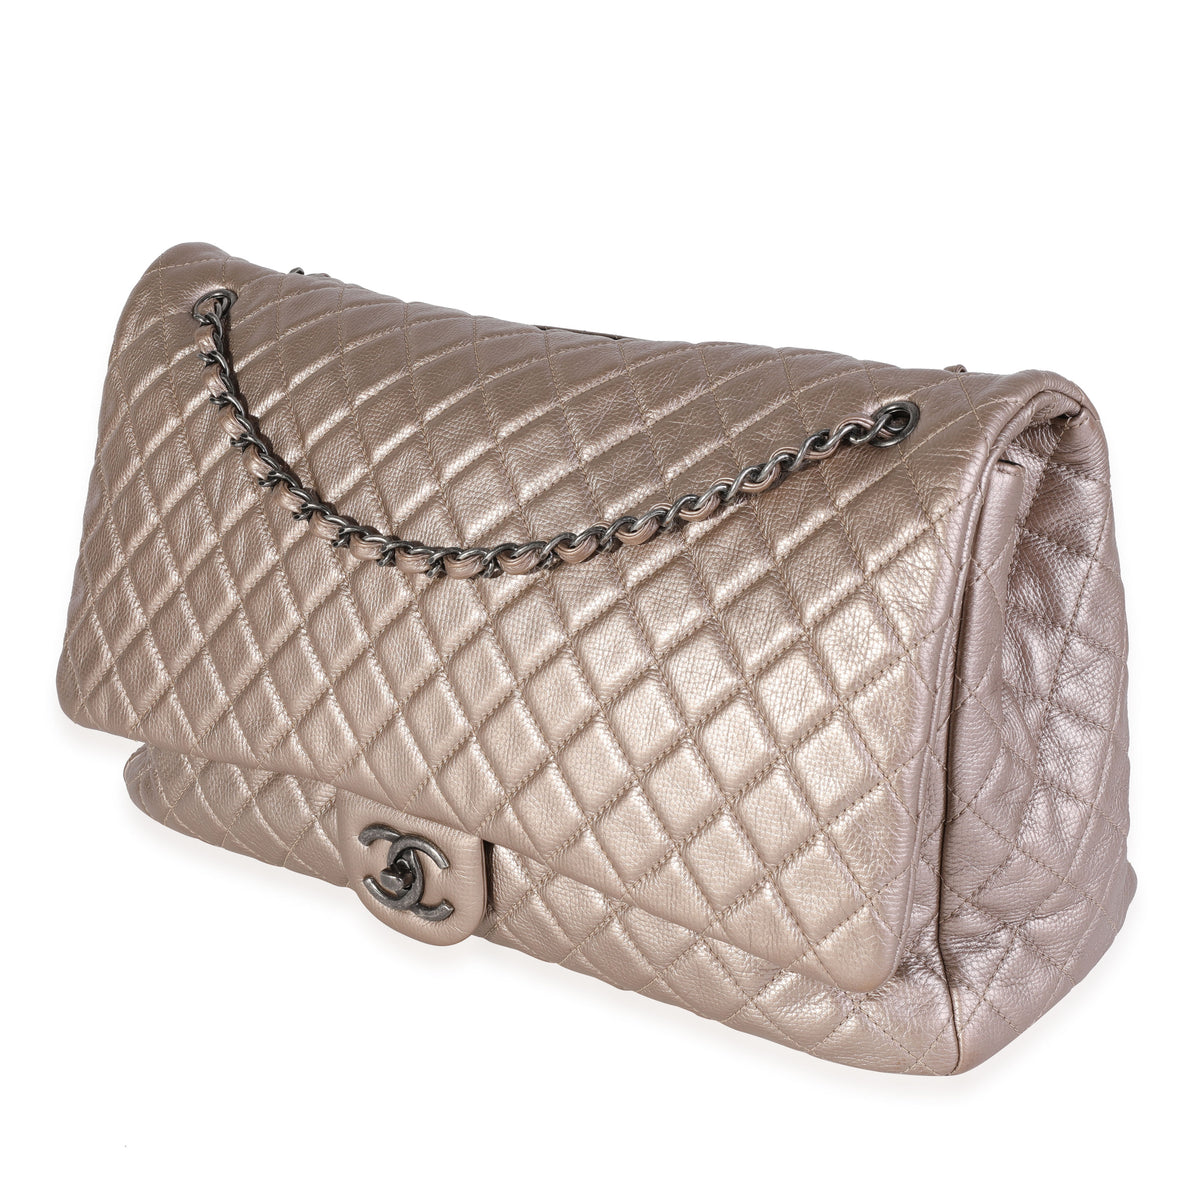 Chanel Metallic Gold Quilted Calfskin Chanel Airlines XXL Travel Flap Bag, myGemma